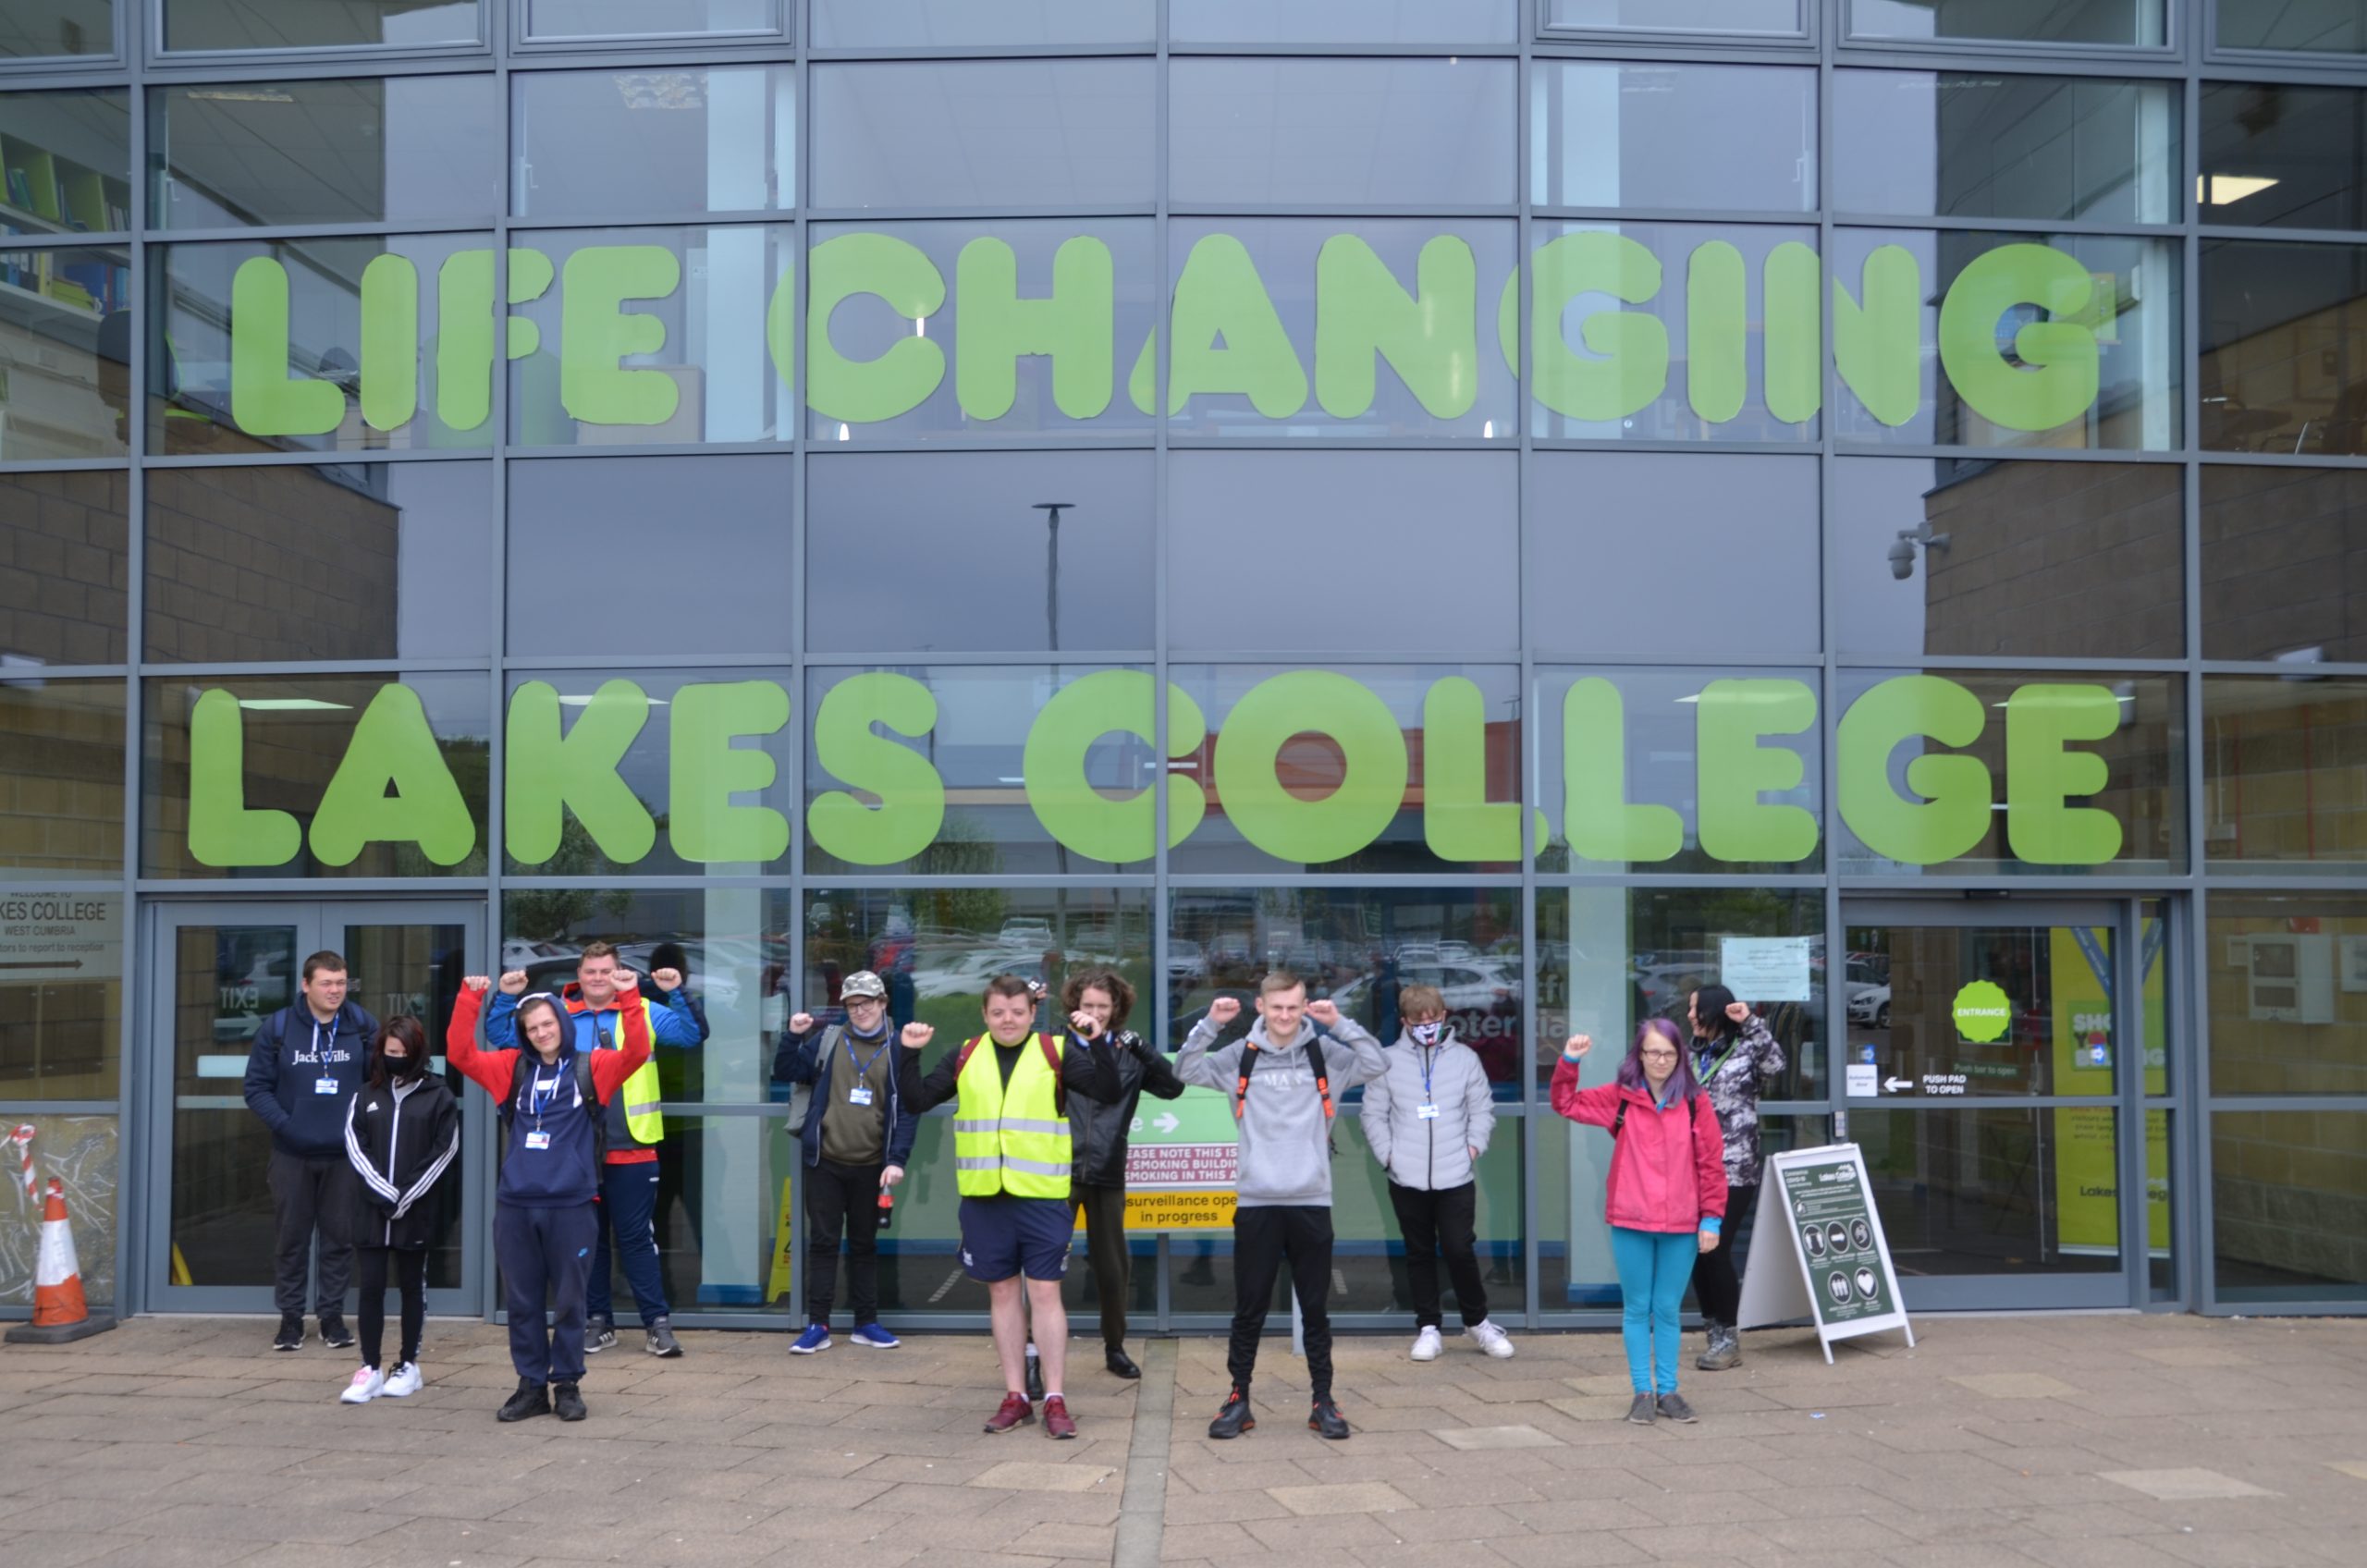 The group of students before they set off for their sponsored walk